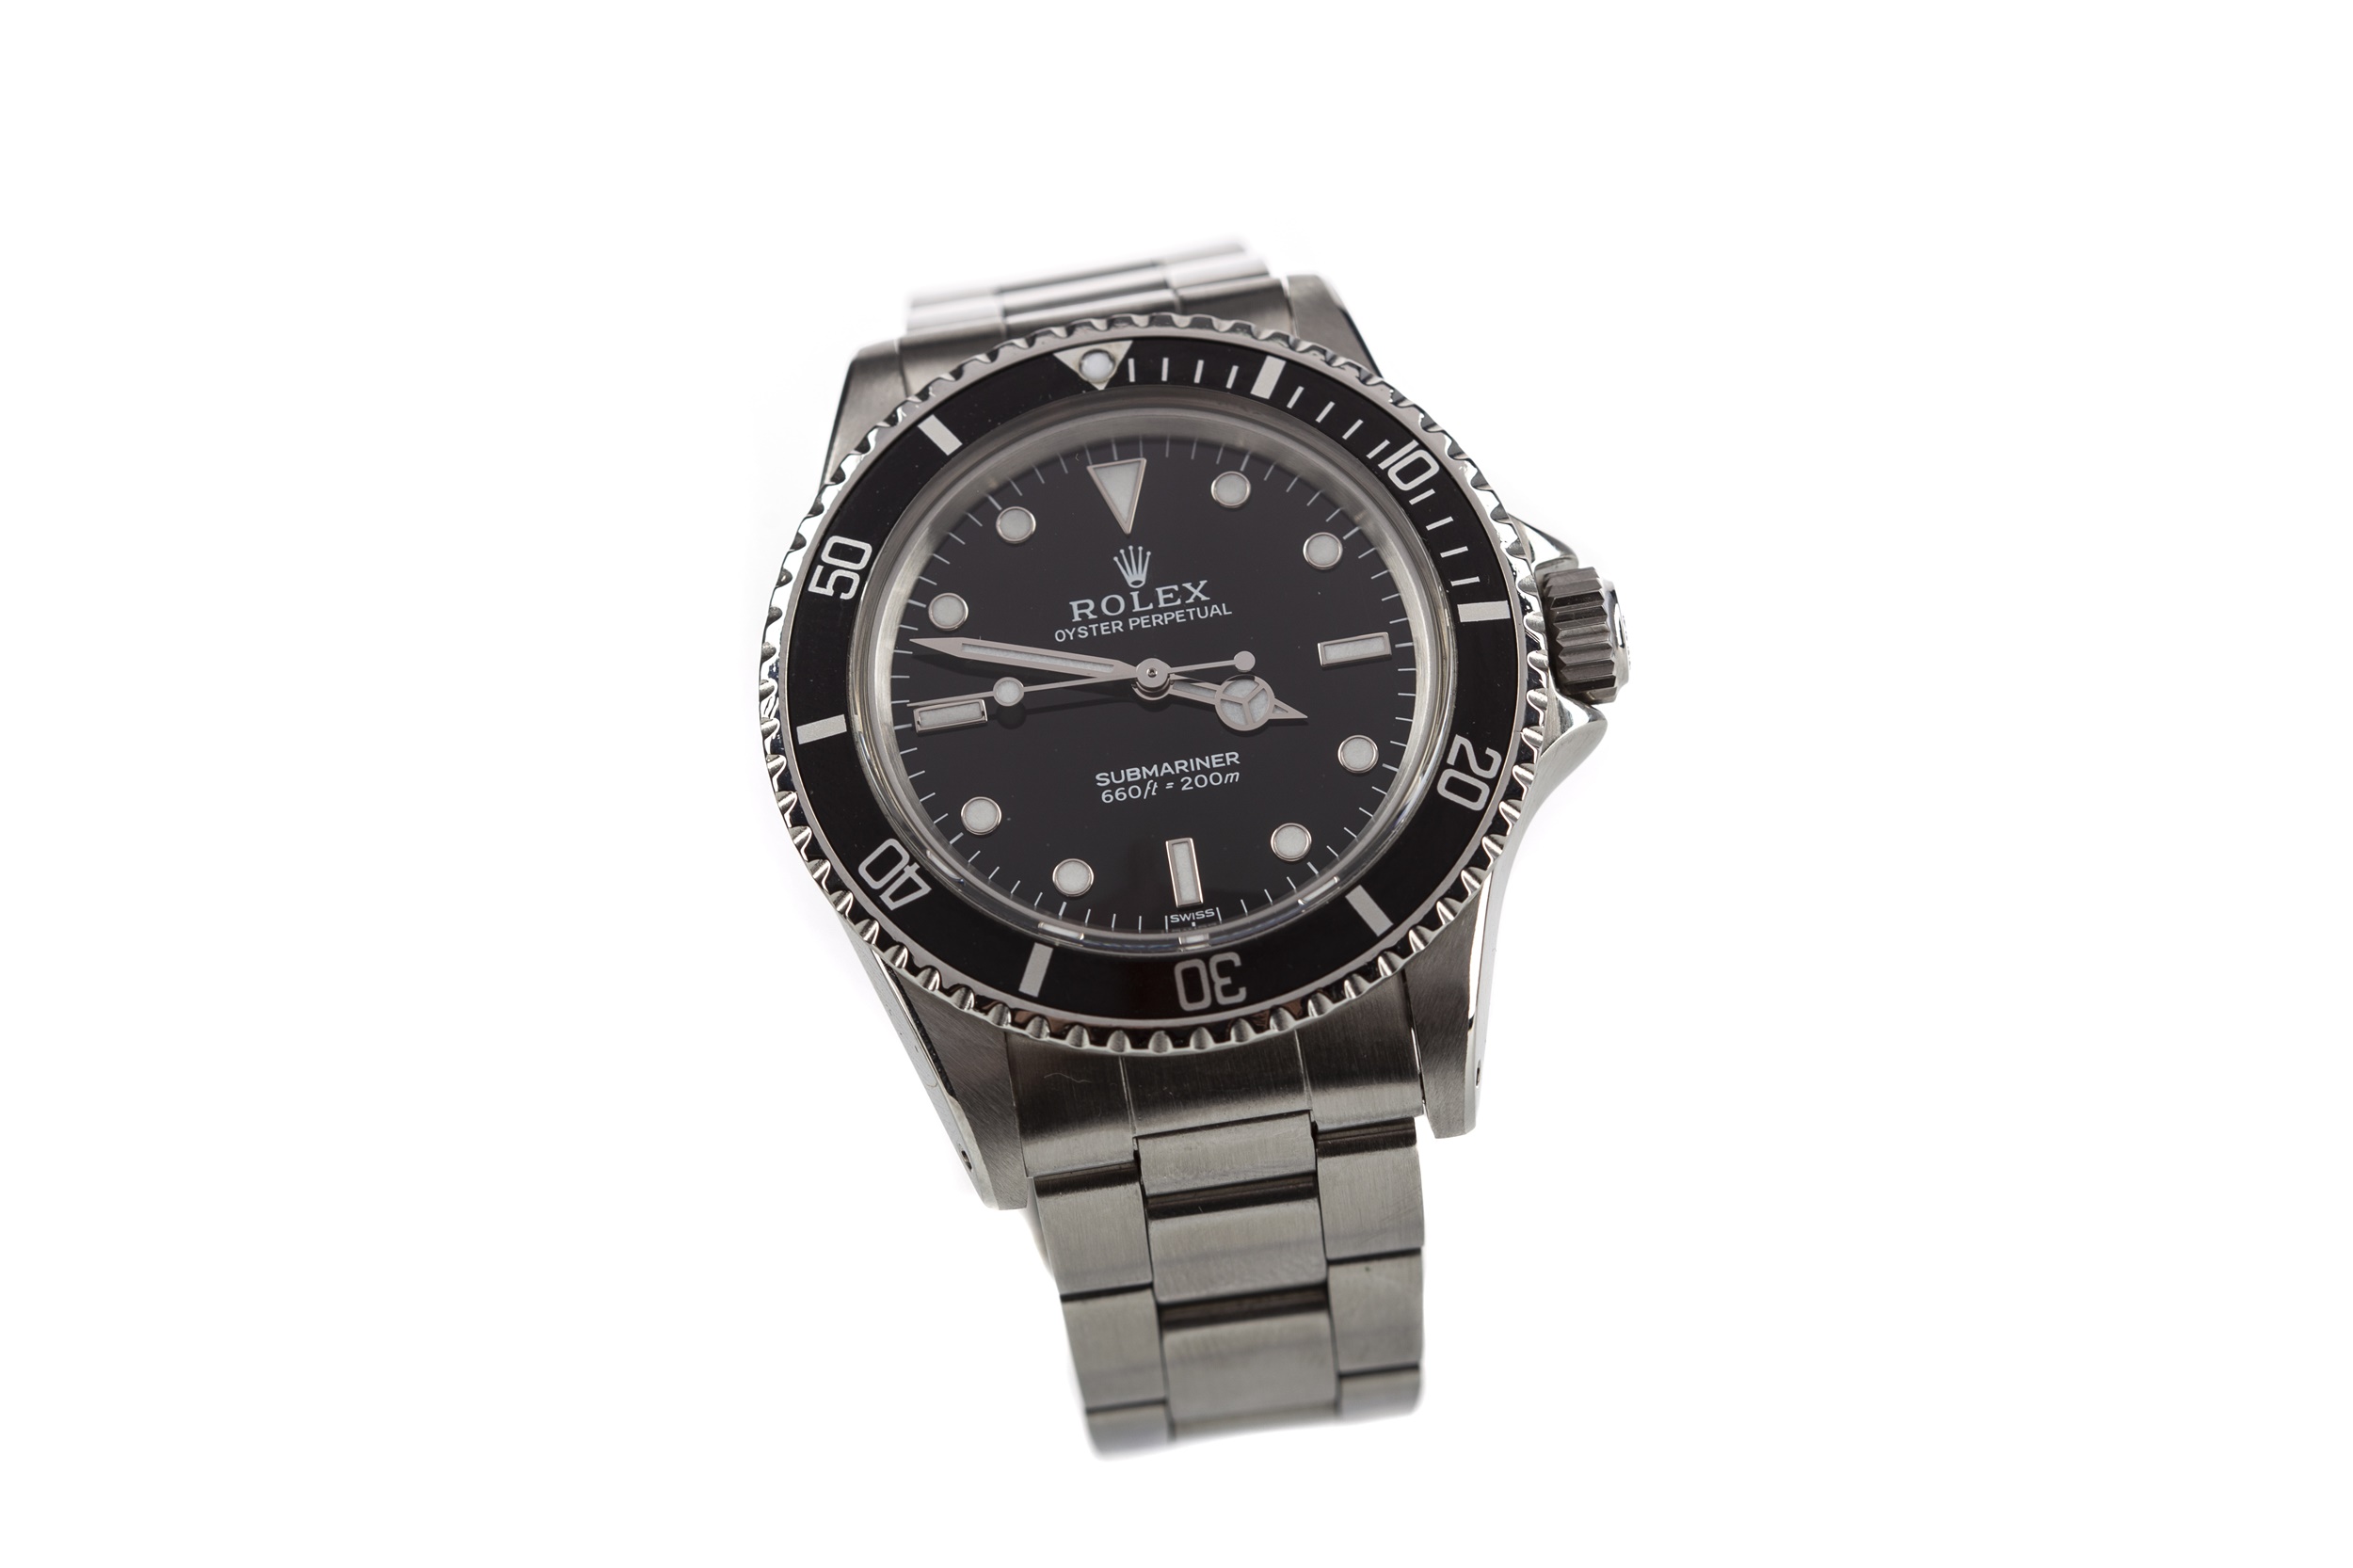 ROLEX 'COMEX' SUBMARINER STAINLESS STEEL AUTOMATIC WRIST WATCH, model 5513, the round black dial - Image 12 of 12